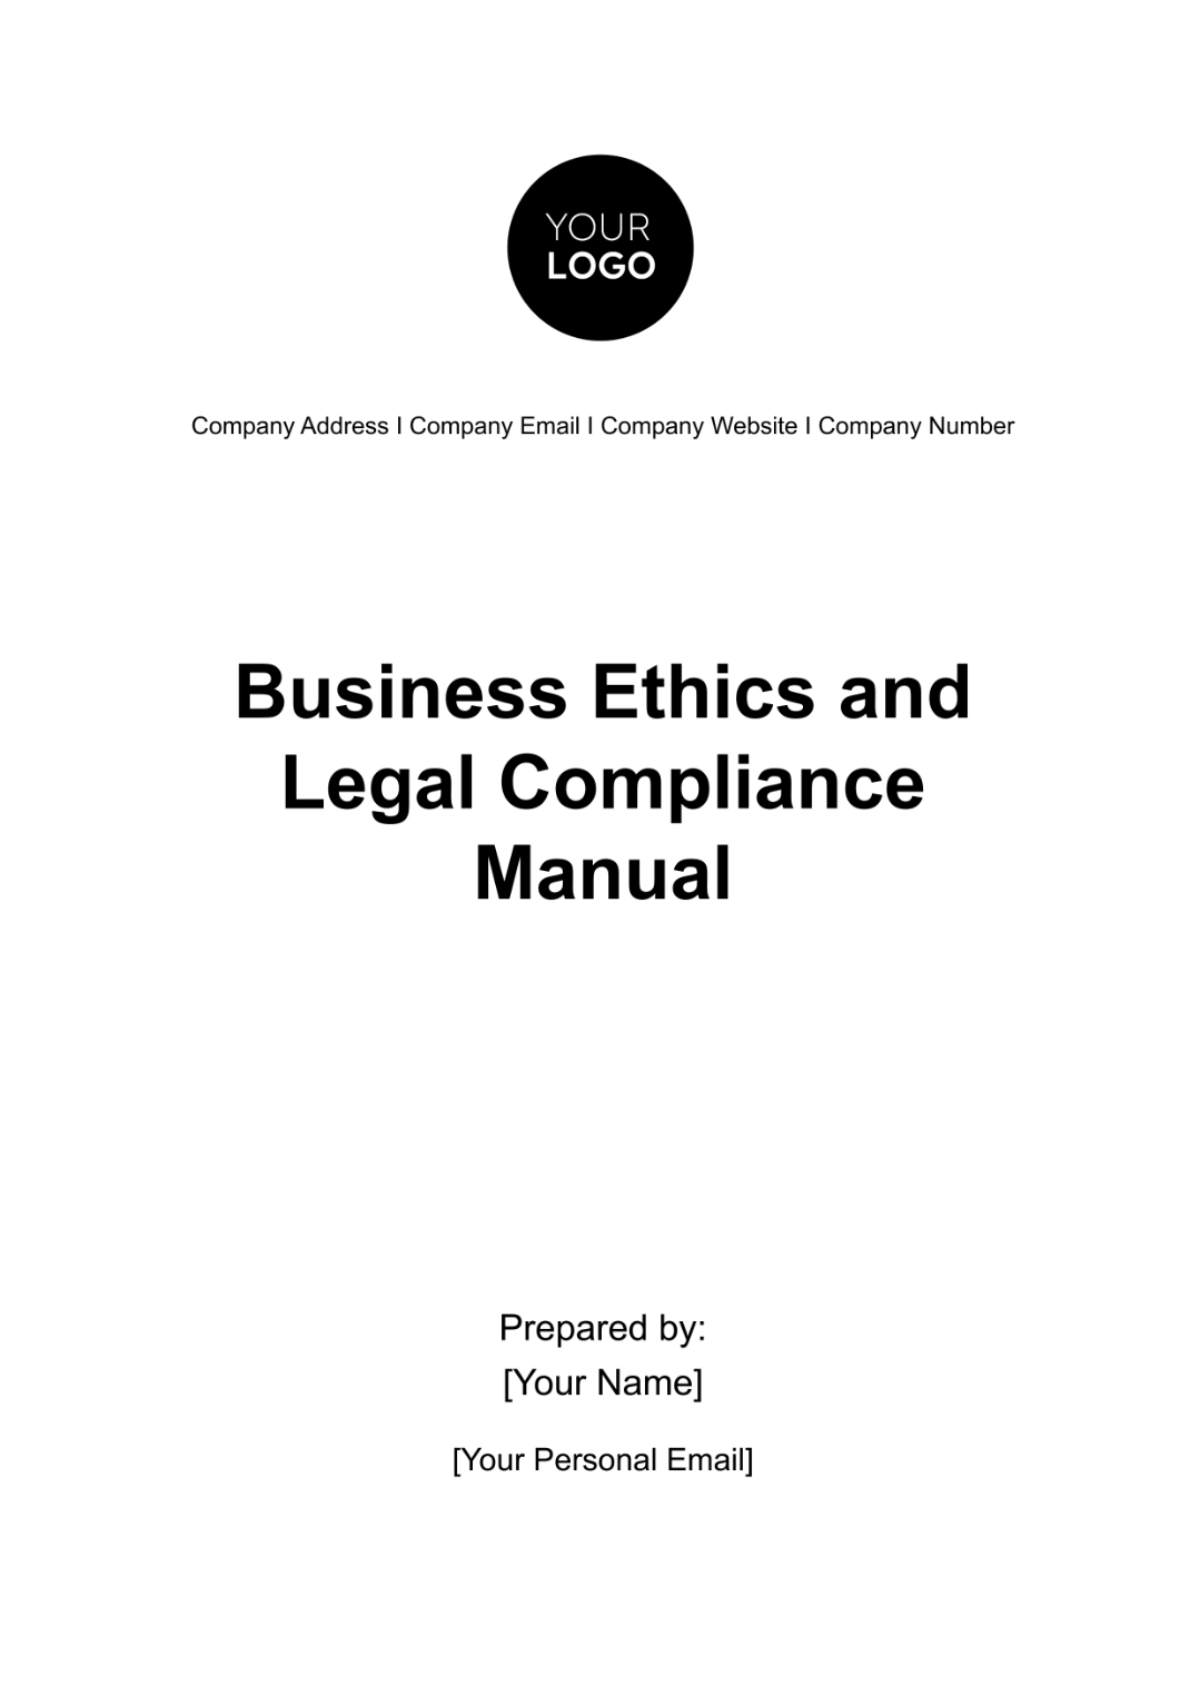 Free Business Ethics and Legal Compliance Manual HR Template